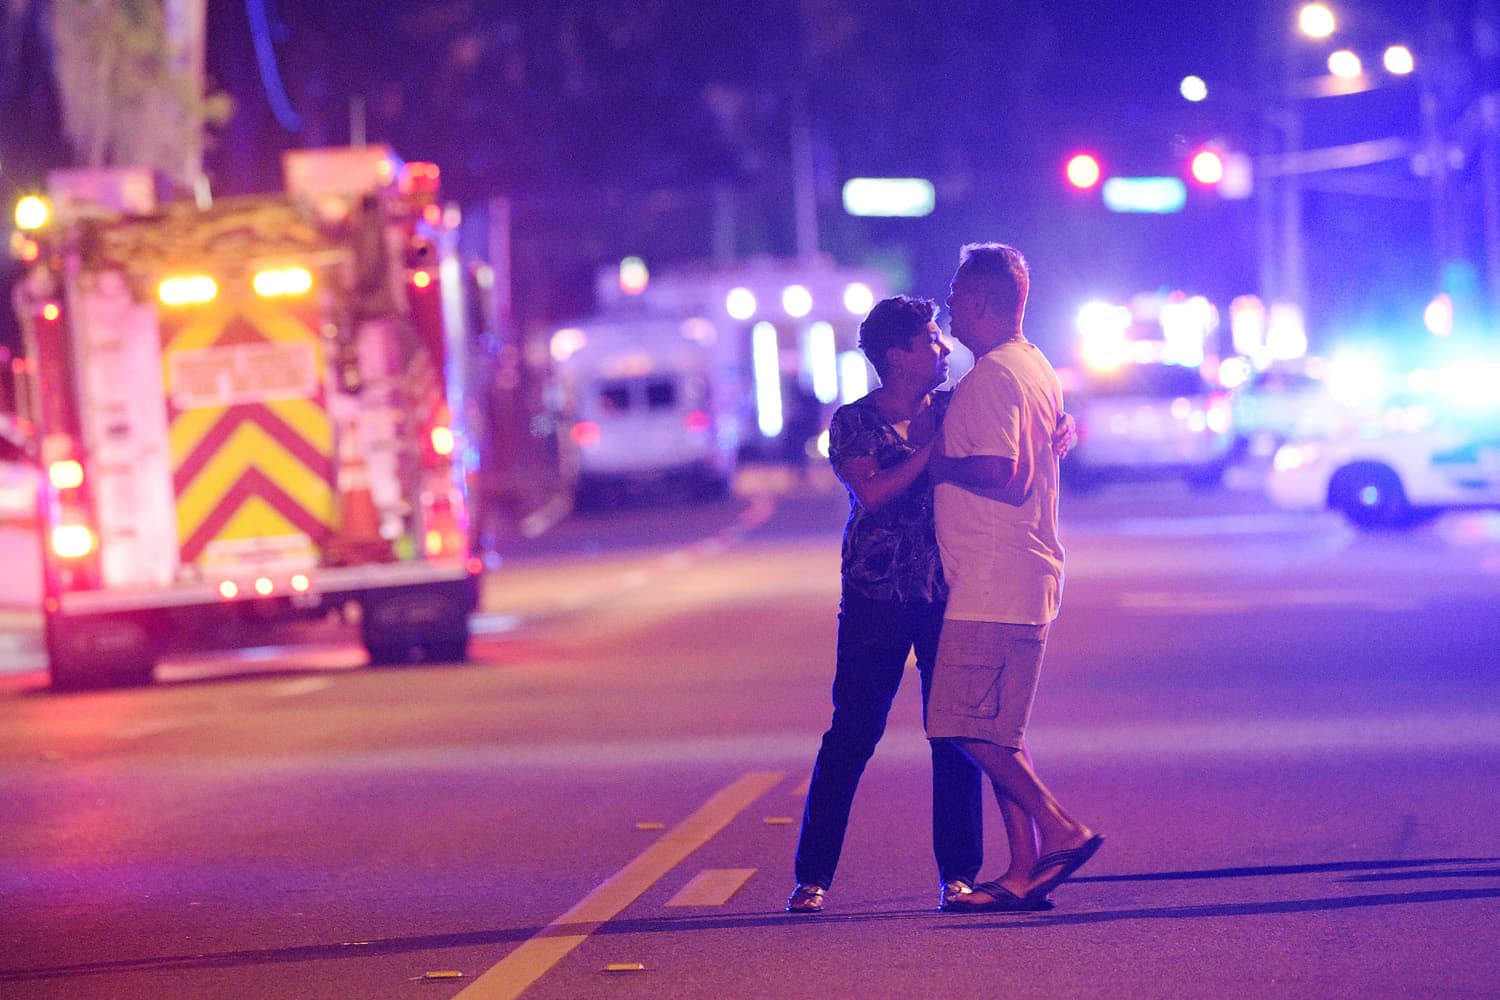 Family members wait for word from police after arriving down the street from a shooting involving multiple fatalities at Pulse Orlando nightclub in Orlando, Fla., Sunday, June 12, 2016. (Phelan M. Ebenhack / AP)